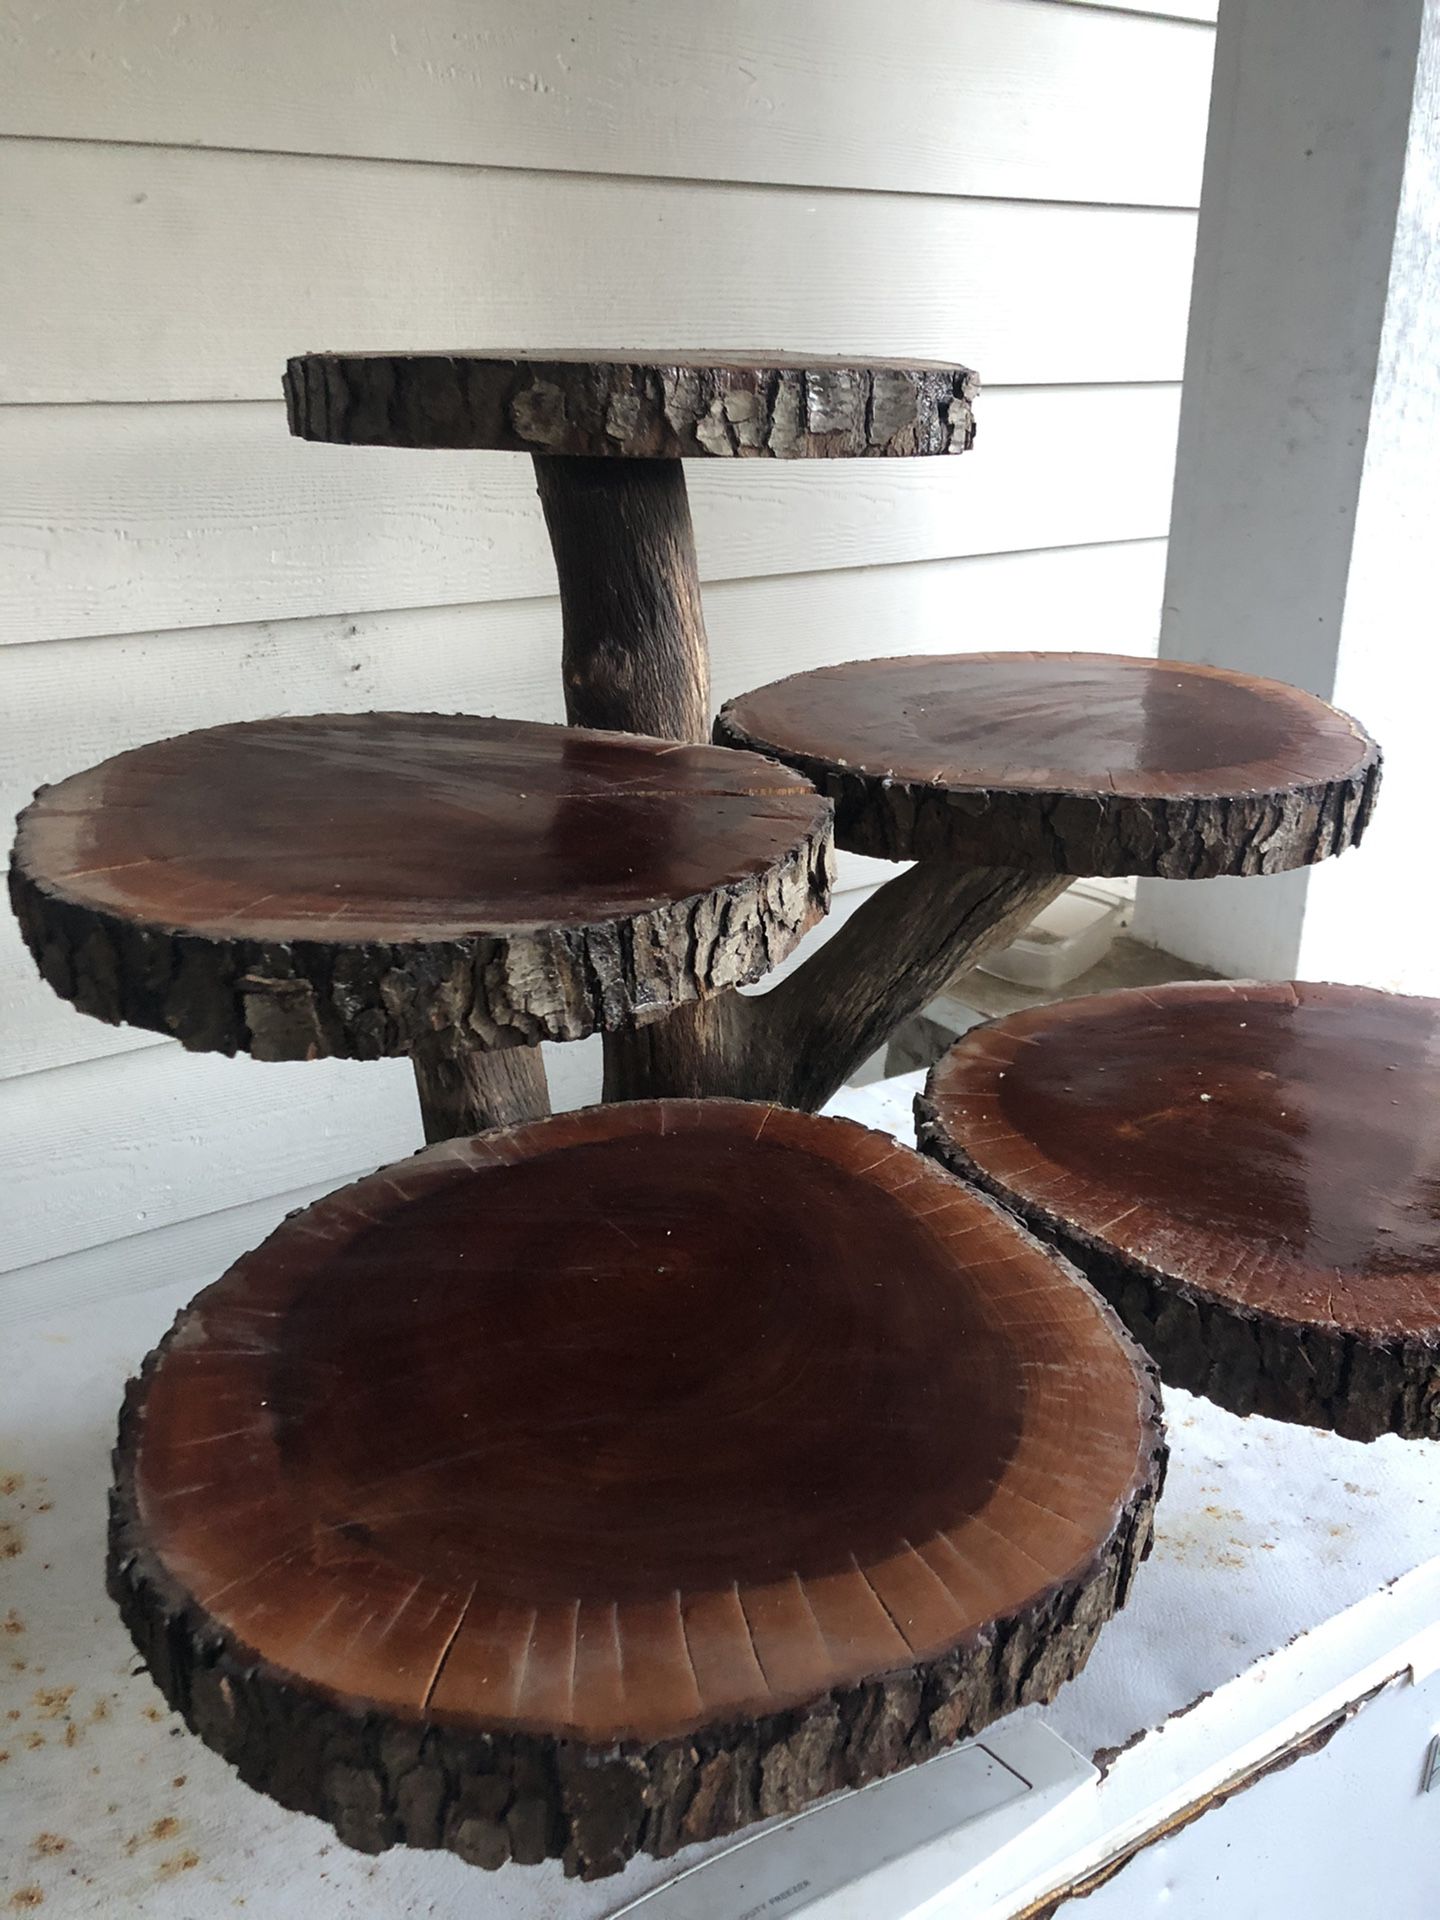 Wood cupcake stand or display stand